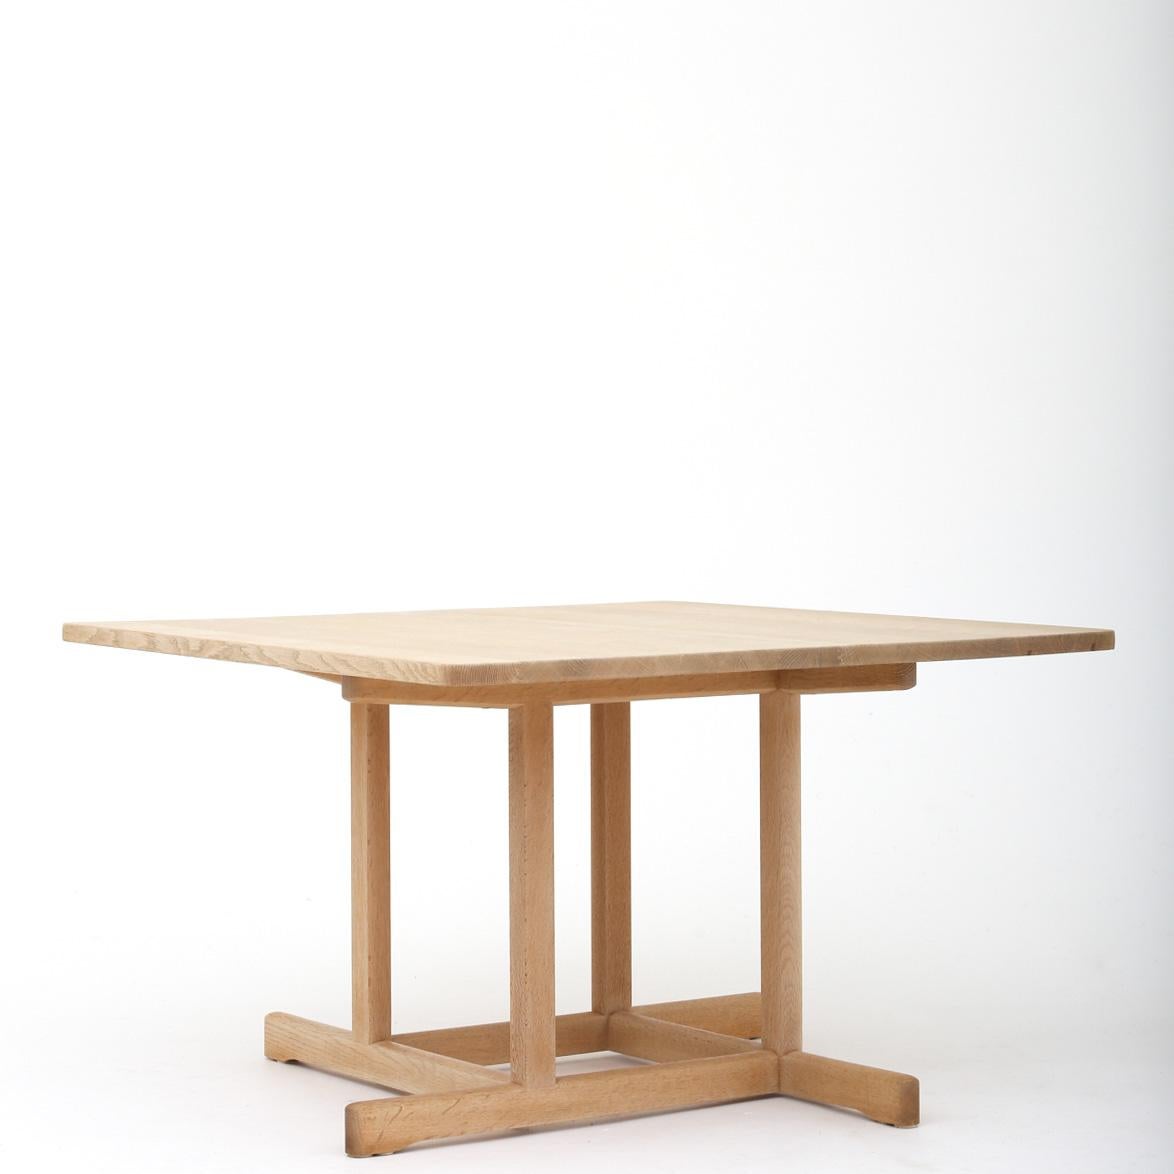 Børge Mogensen and Fredericia Furniture. BM 5271 - Coffee table in solid oak.